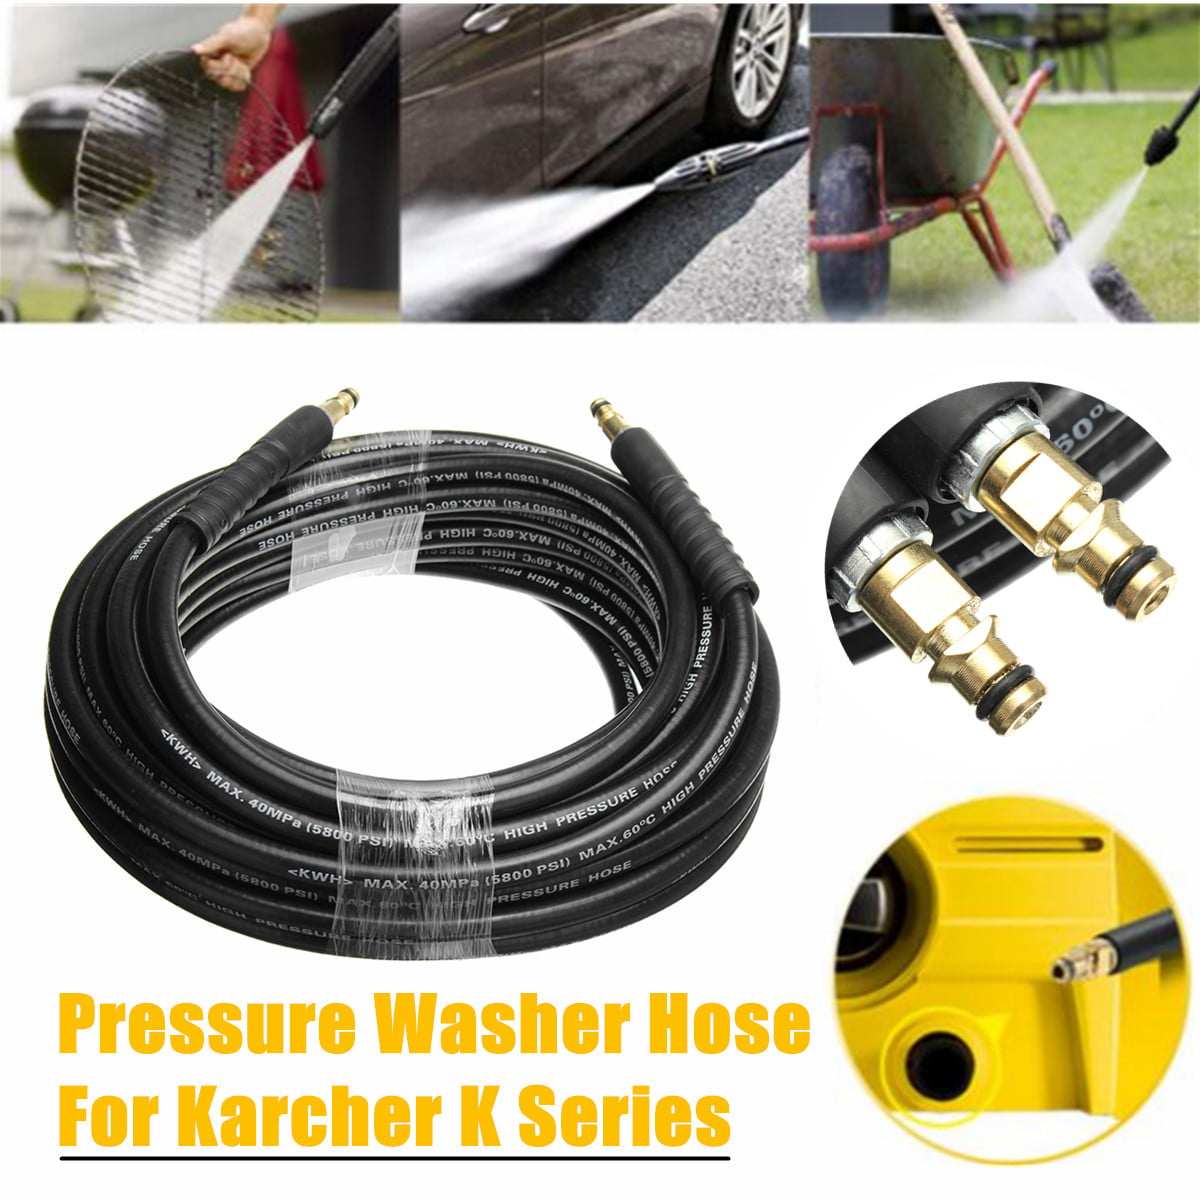 10M High Pressure Replacement Flexible Drain Pipe Hose Tube for Karcher Cleaner 